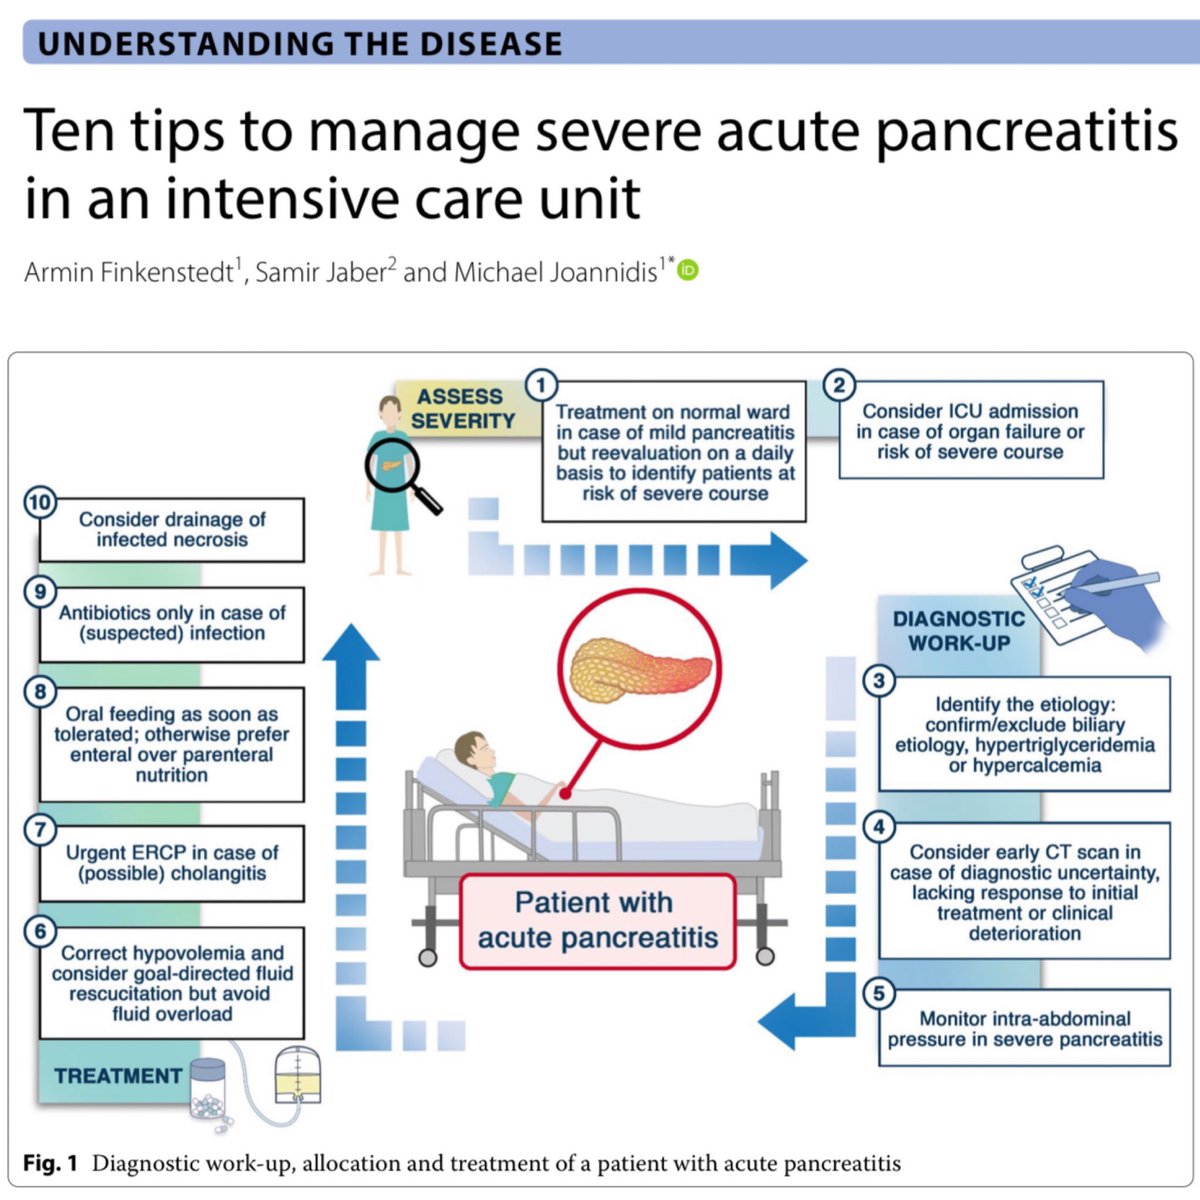 Manage severe acute pancreatitis like a pro! The days of just arbitrarily flooding patients with fluids and not feeding our patients are behind us. 🎩 tip to the authors. eddyjoemd.com/foamed/